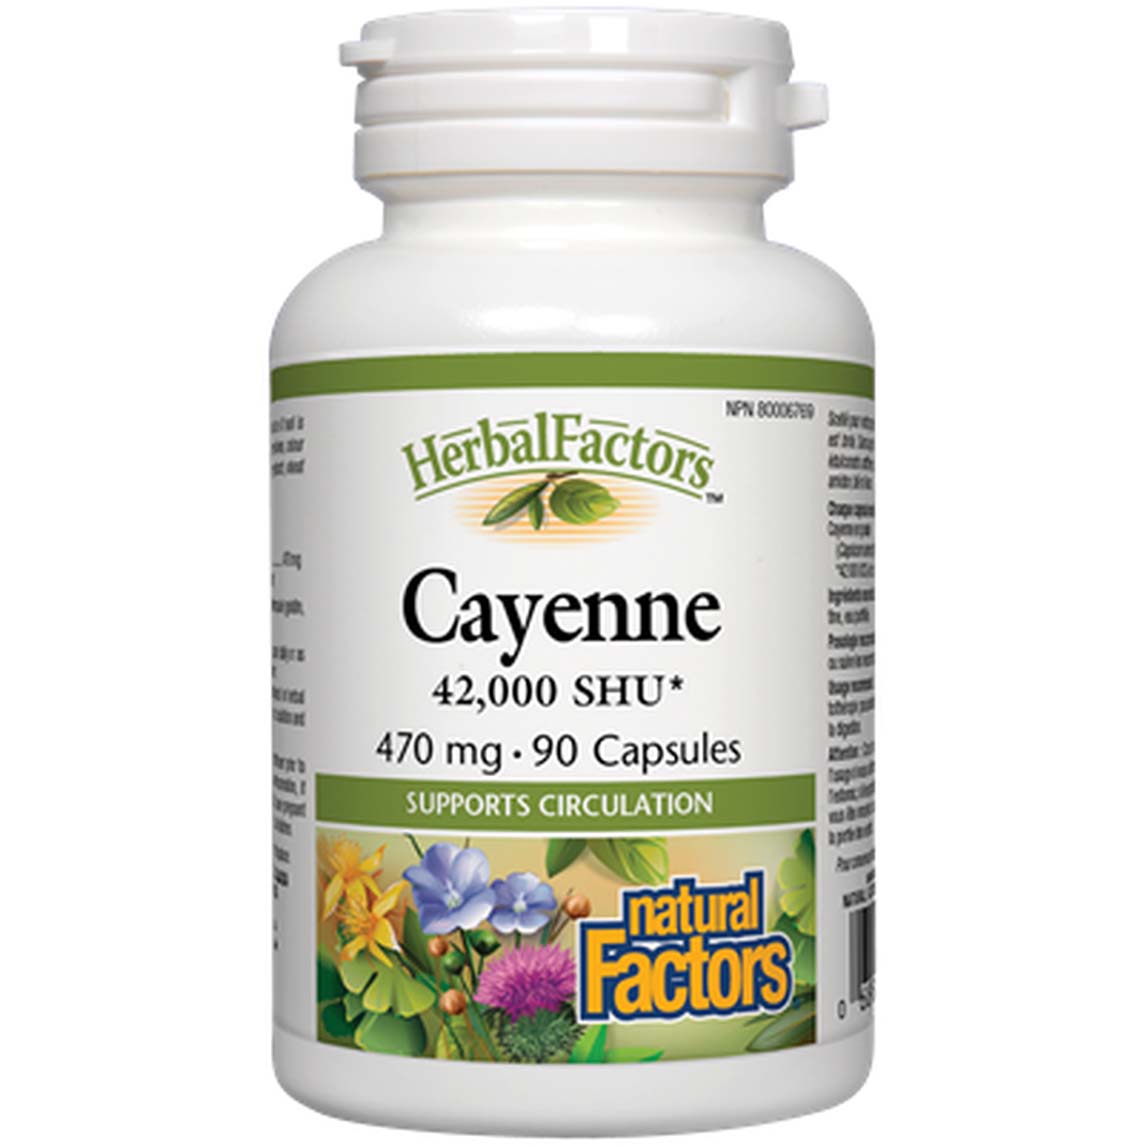 Natural Factors Cayenne 90 Capsules 470 mg